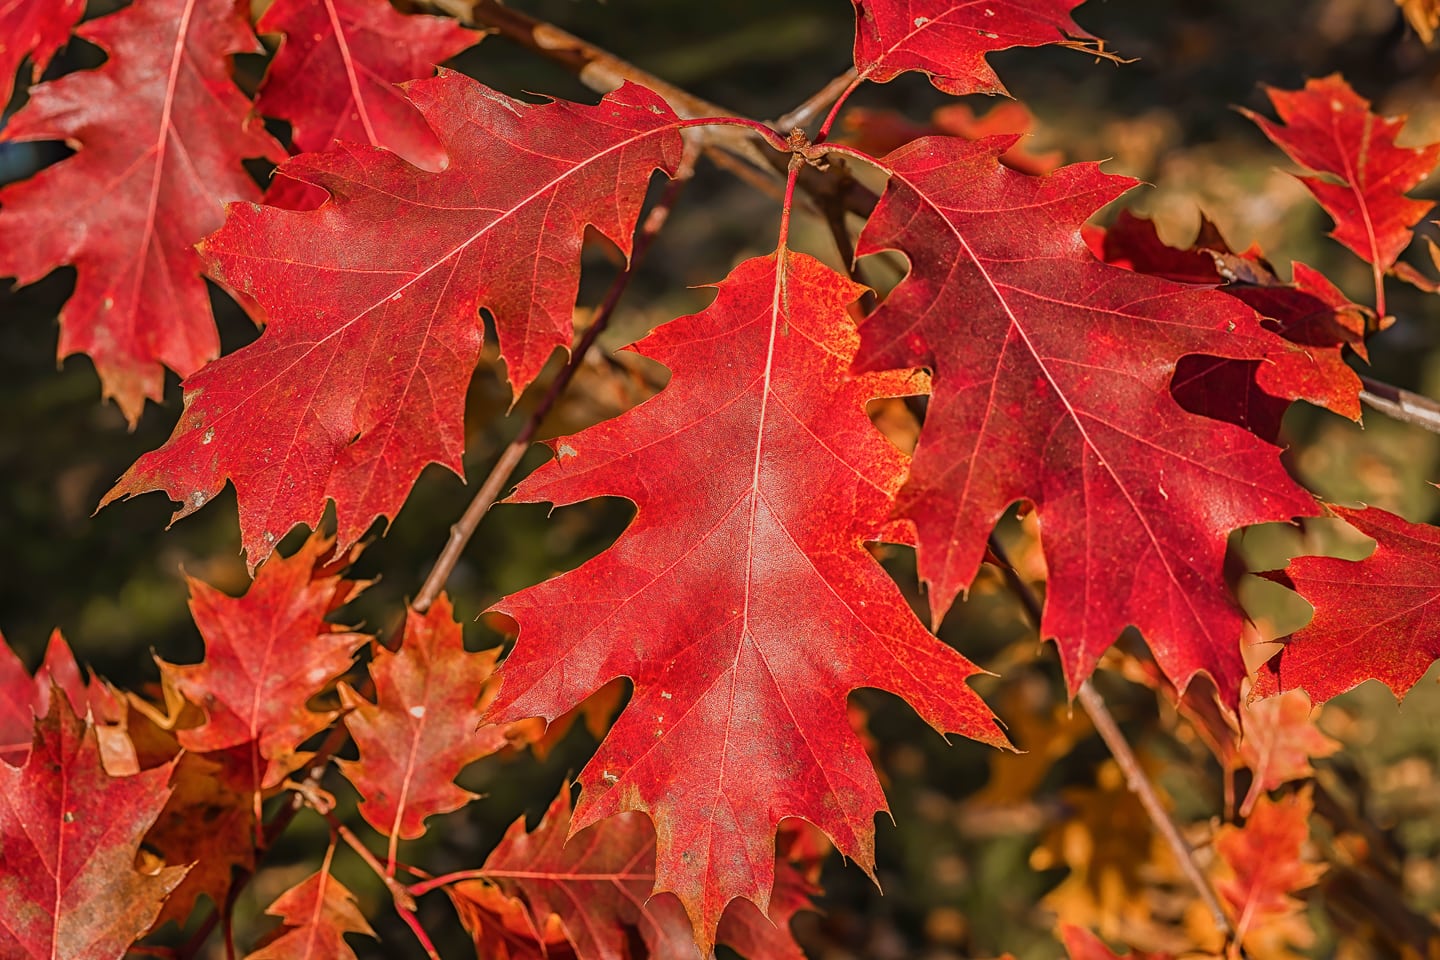 A close-up of northern red oak leaves in the fall